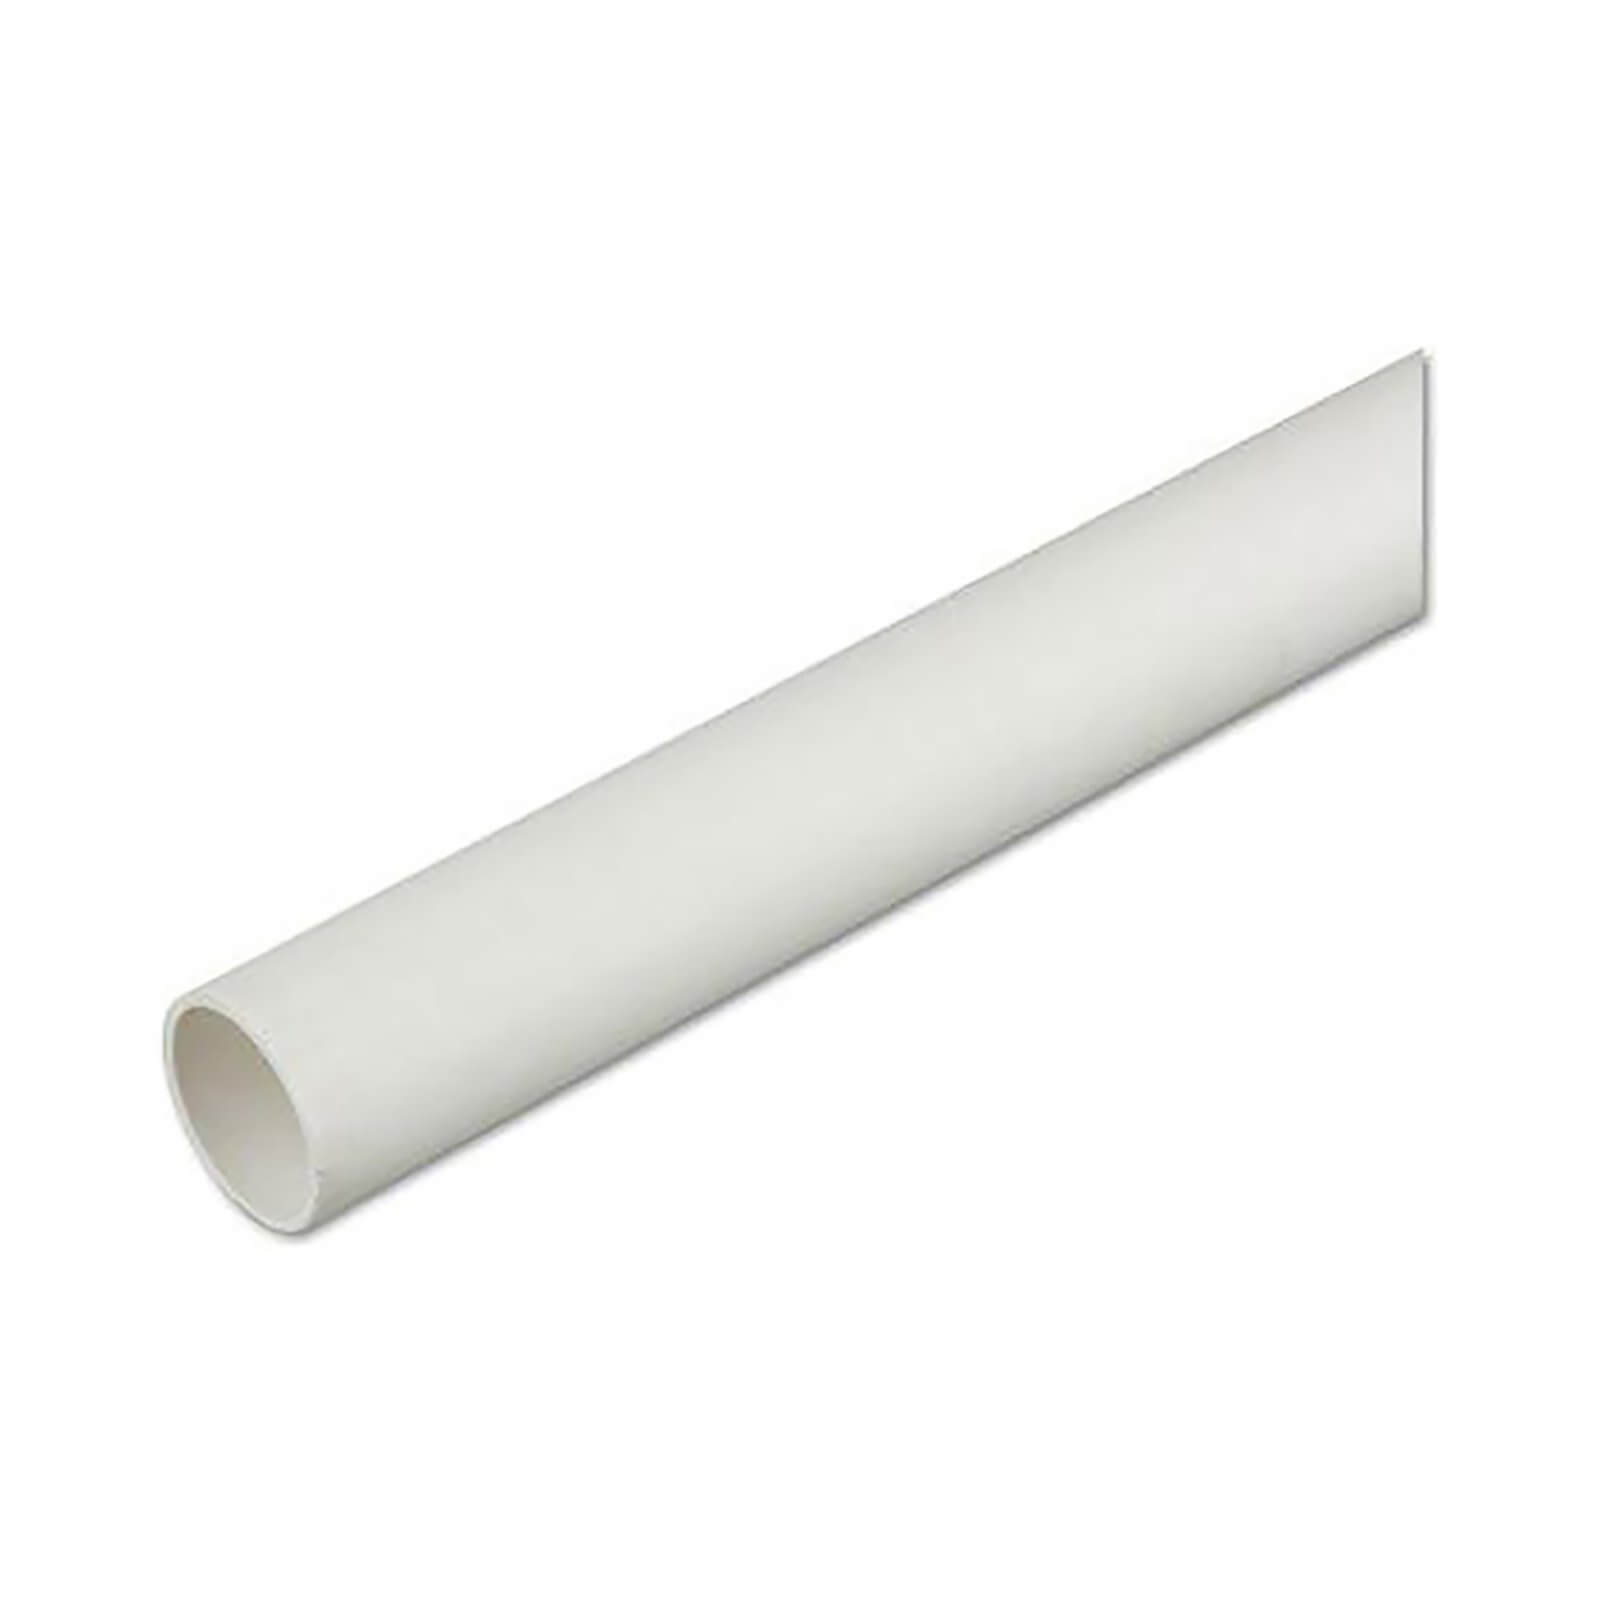 Universal Waste Pipe - 40mm x 2m